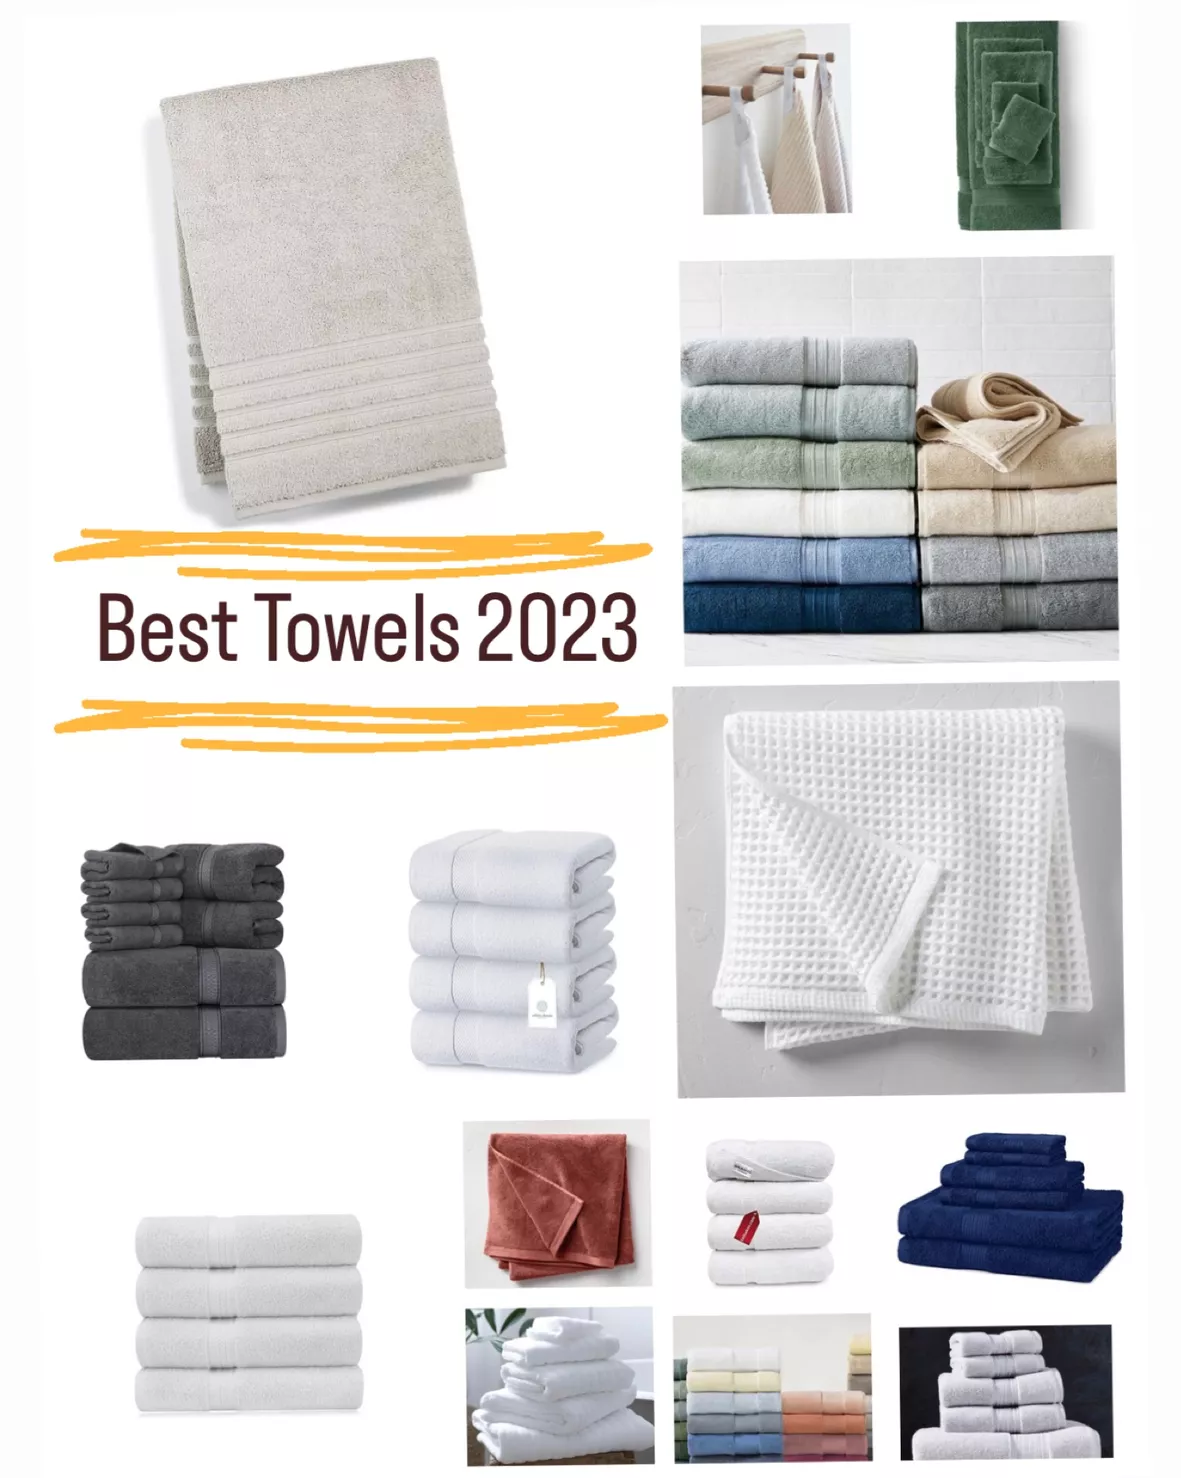 The Frontgate Resort Collection Bath Towels are on sale now